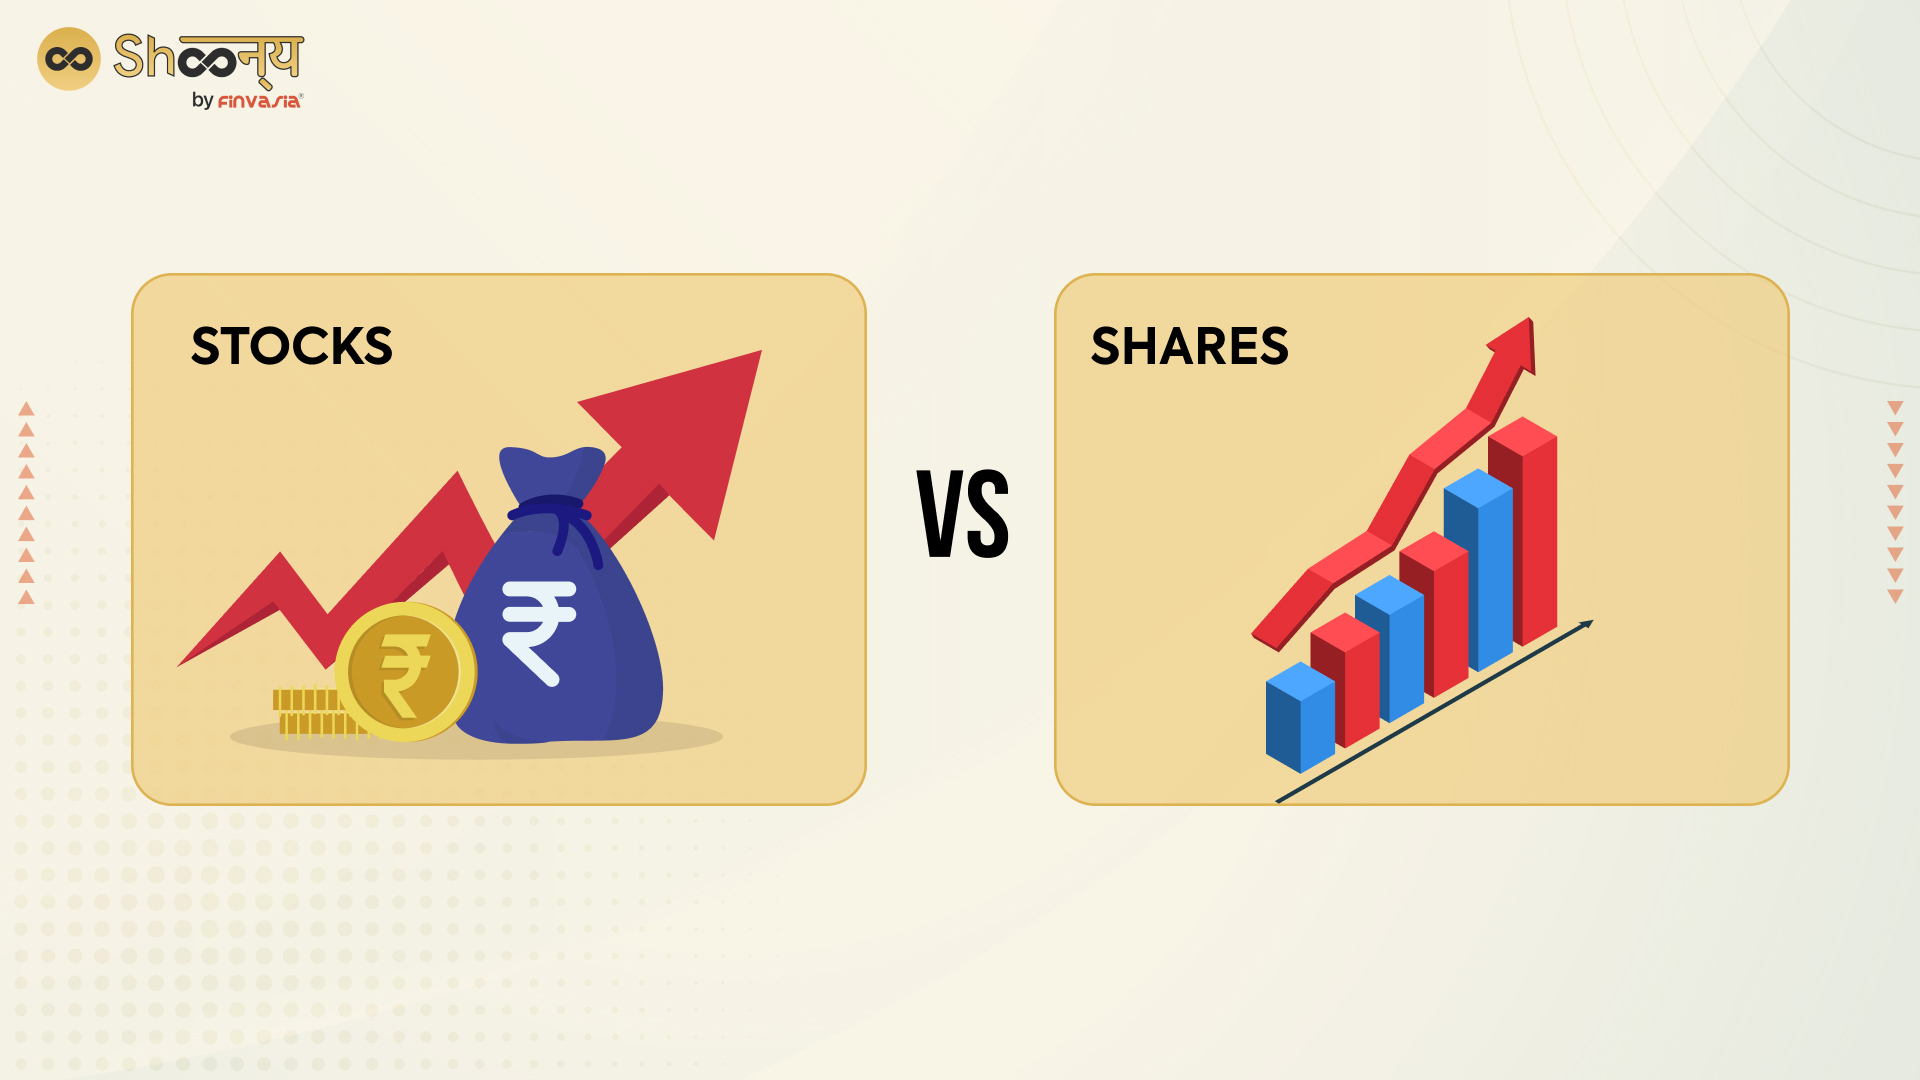 Difference Between Stock and Share